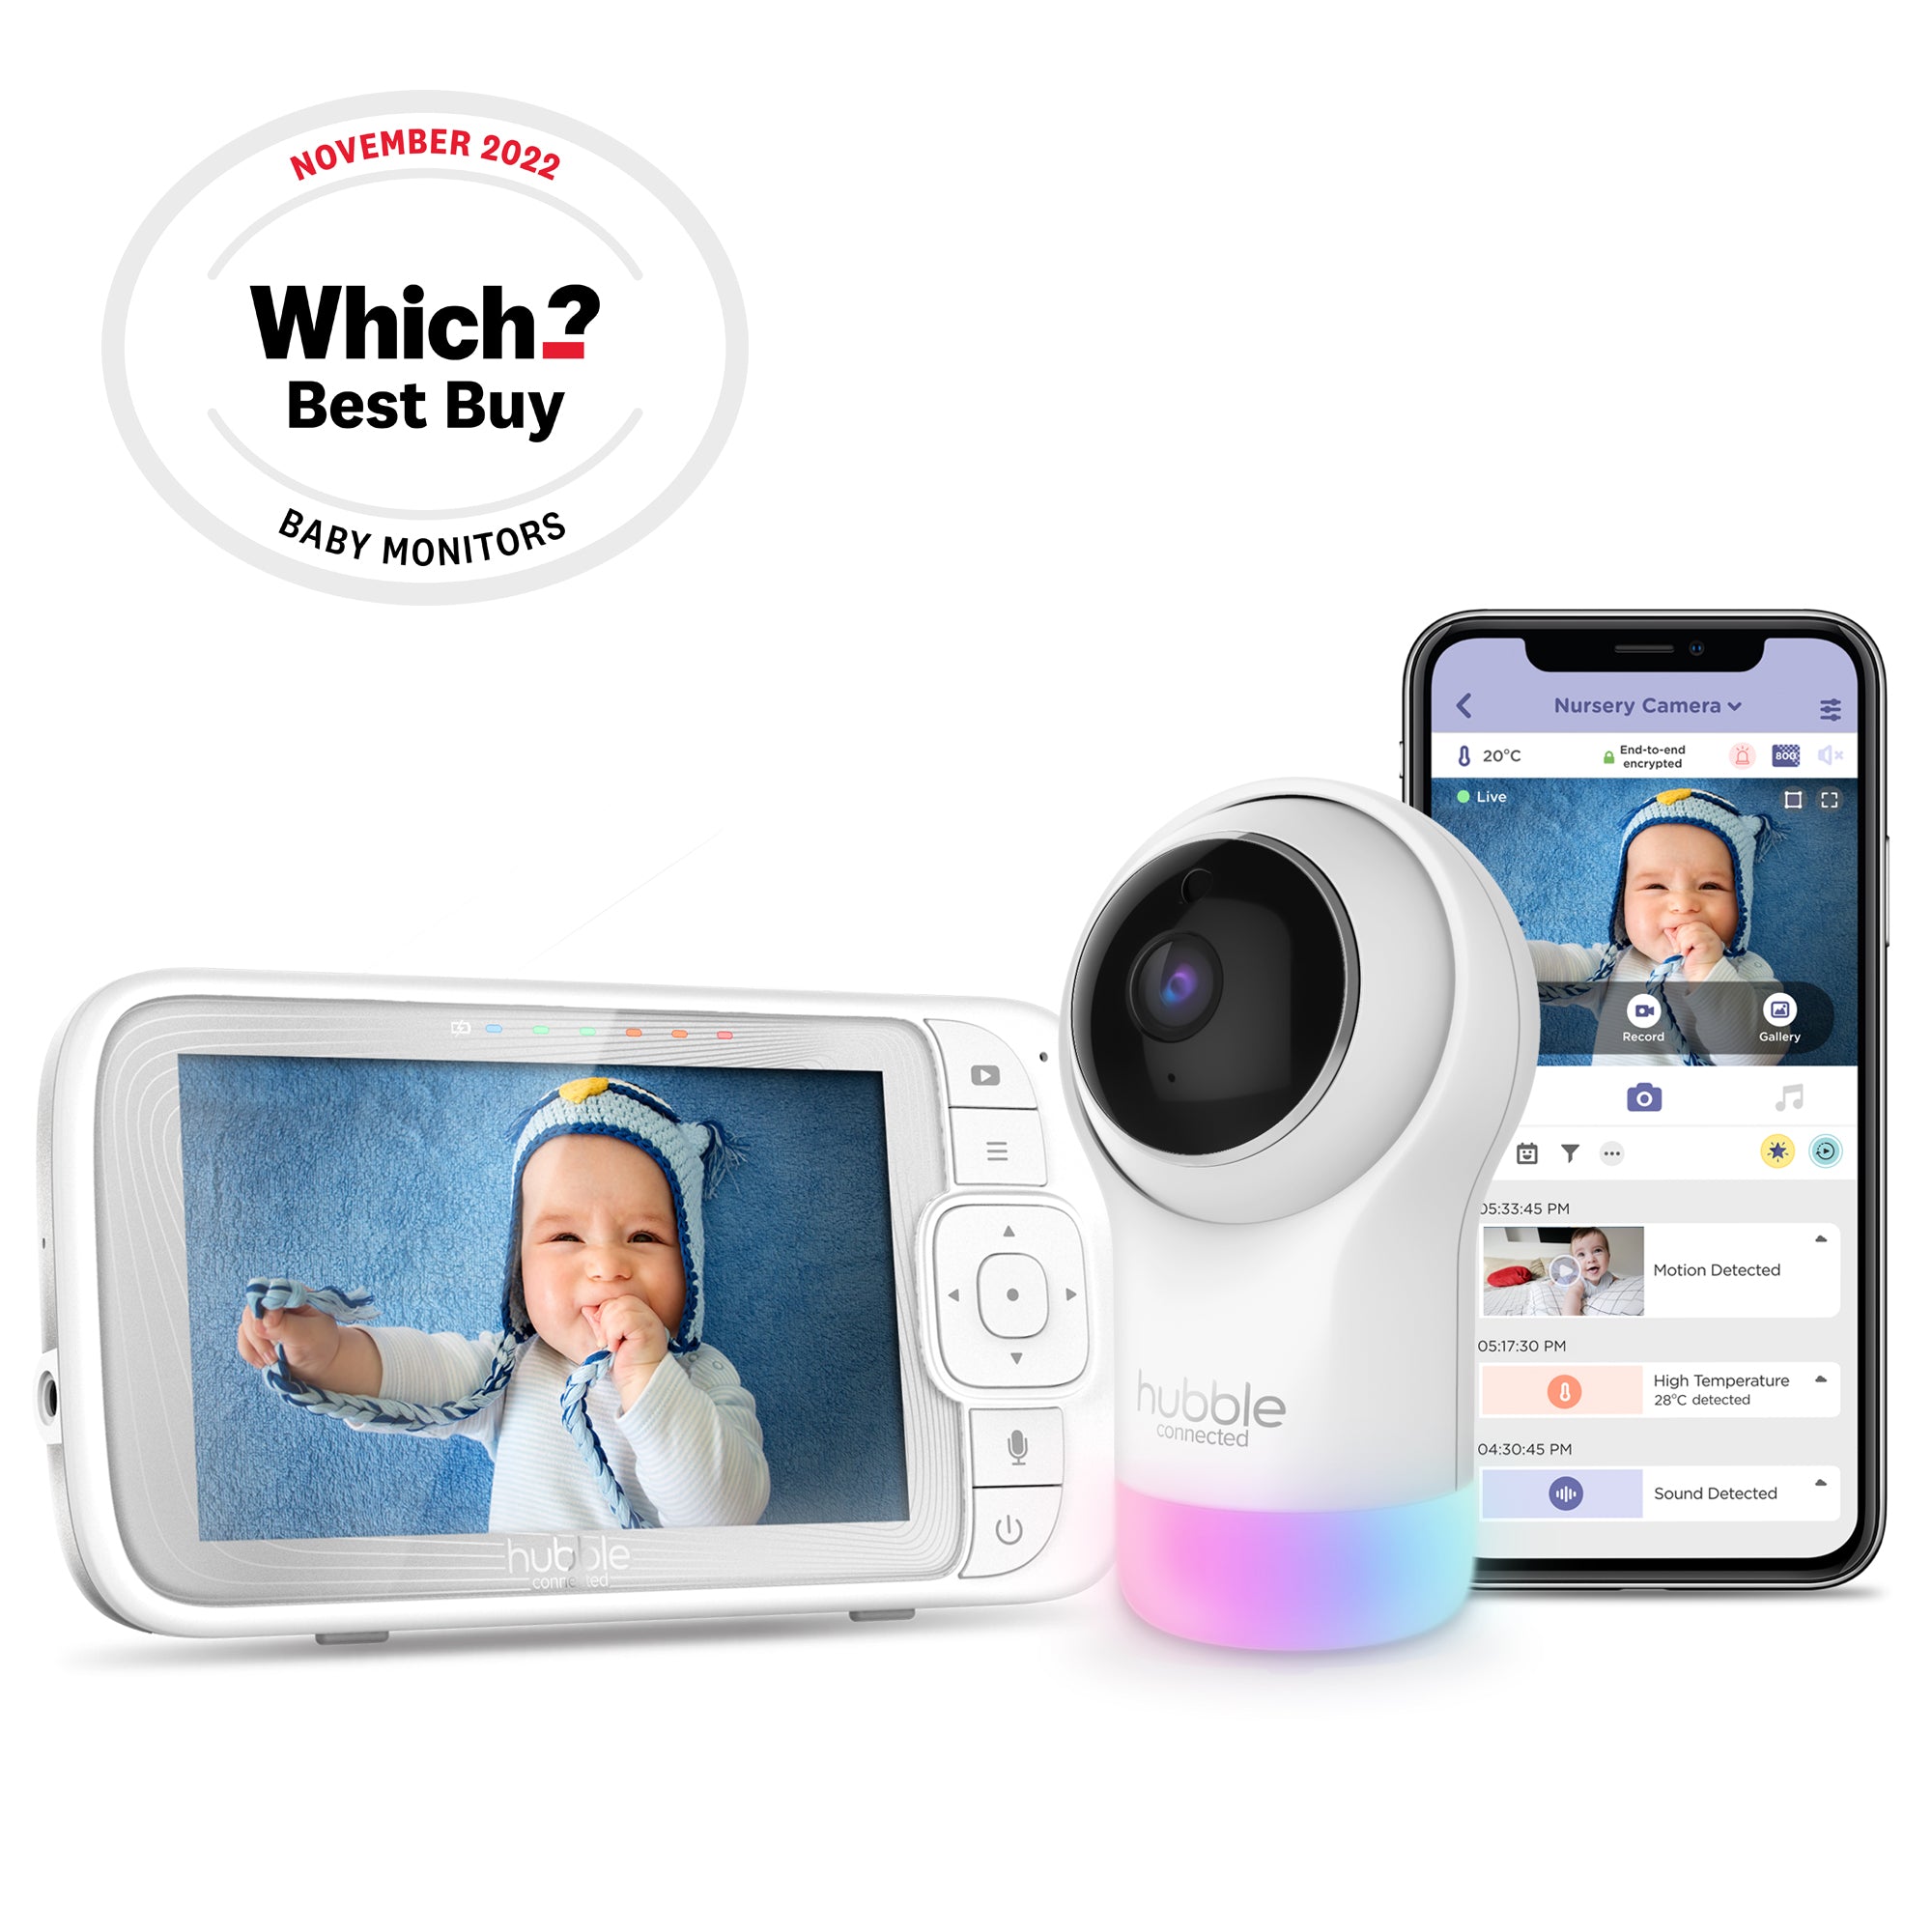 Hubble Connected Nursery Pal Glow+ Smart Video Monitor Featured in Nur